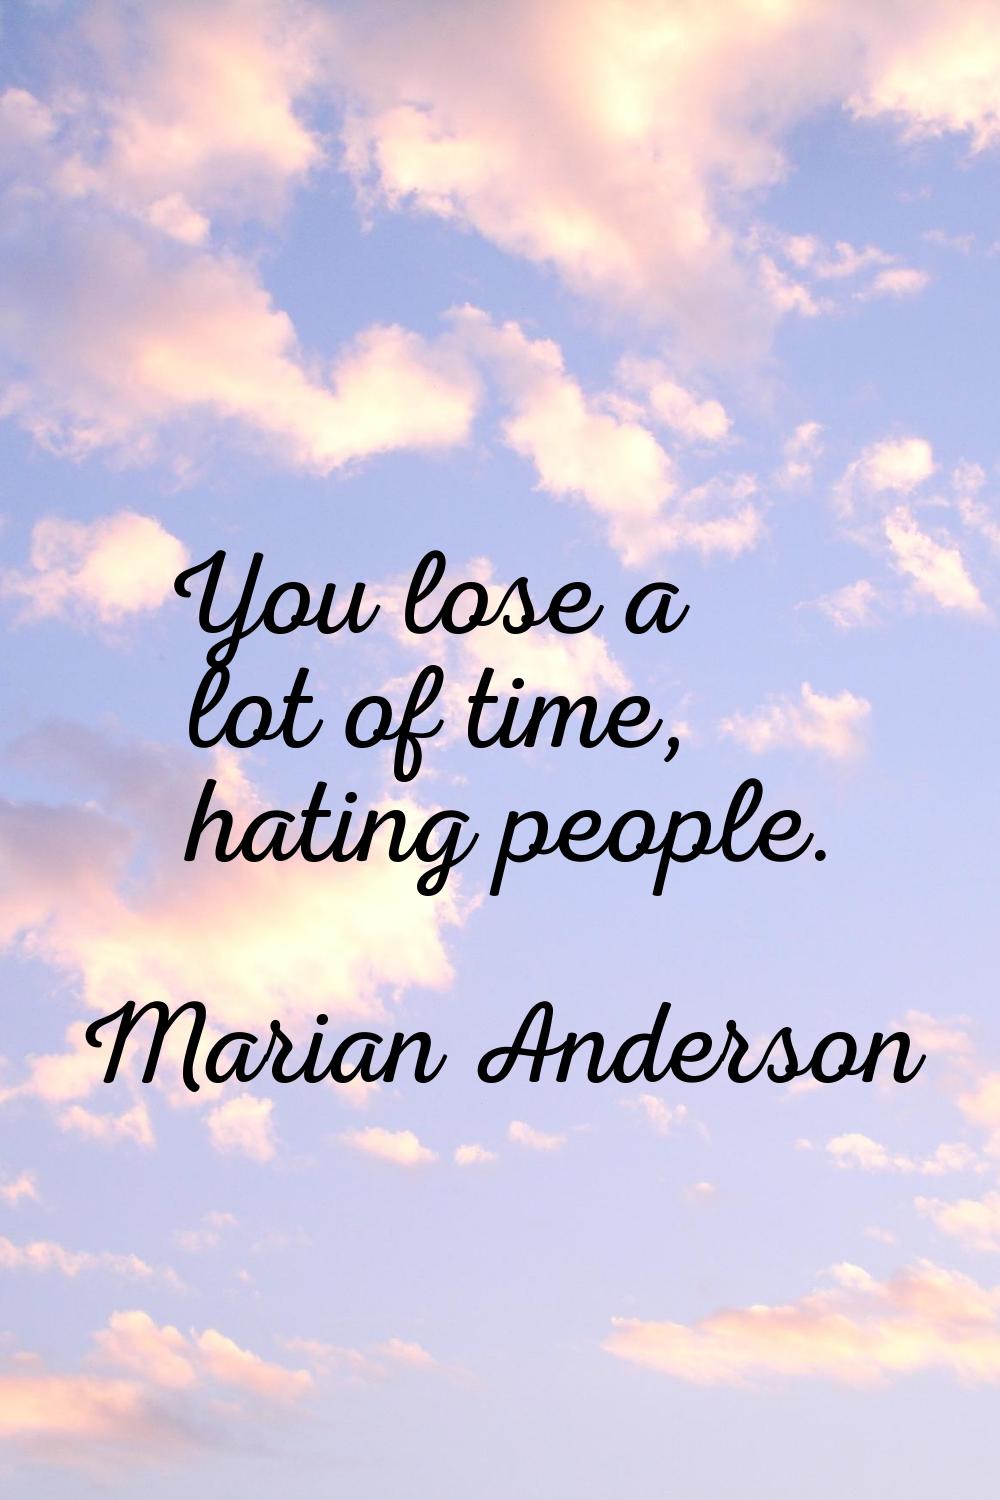 You lose a lot of time, hating people.